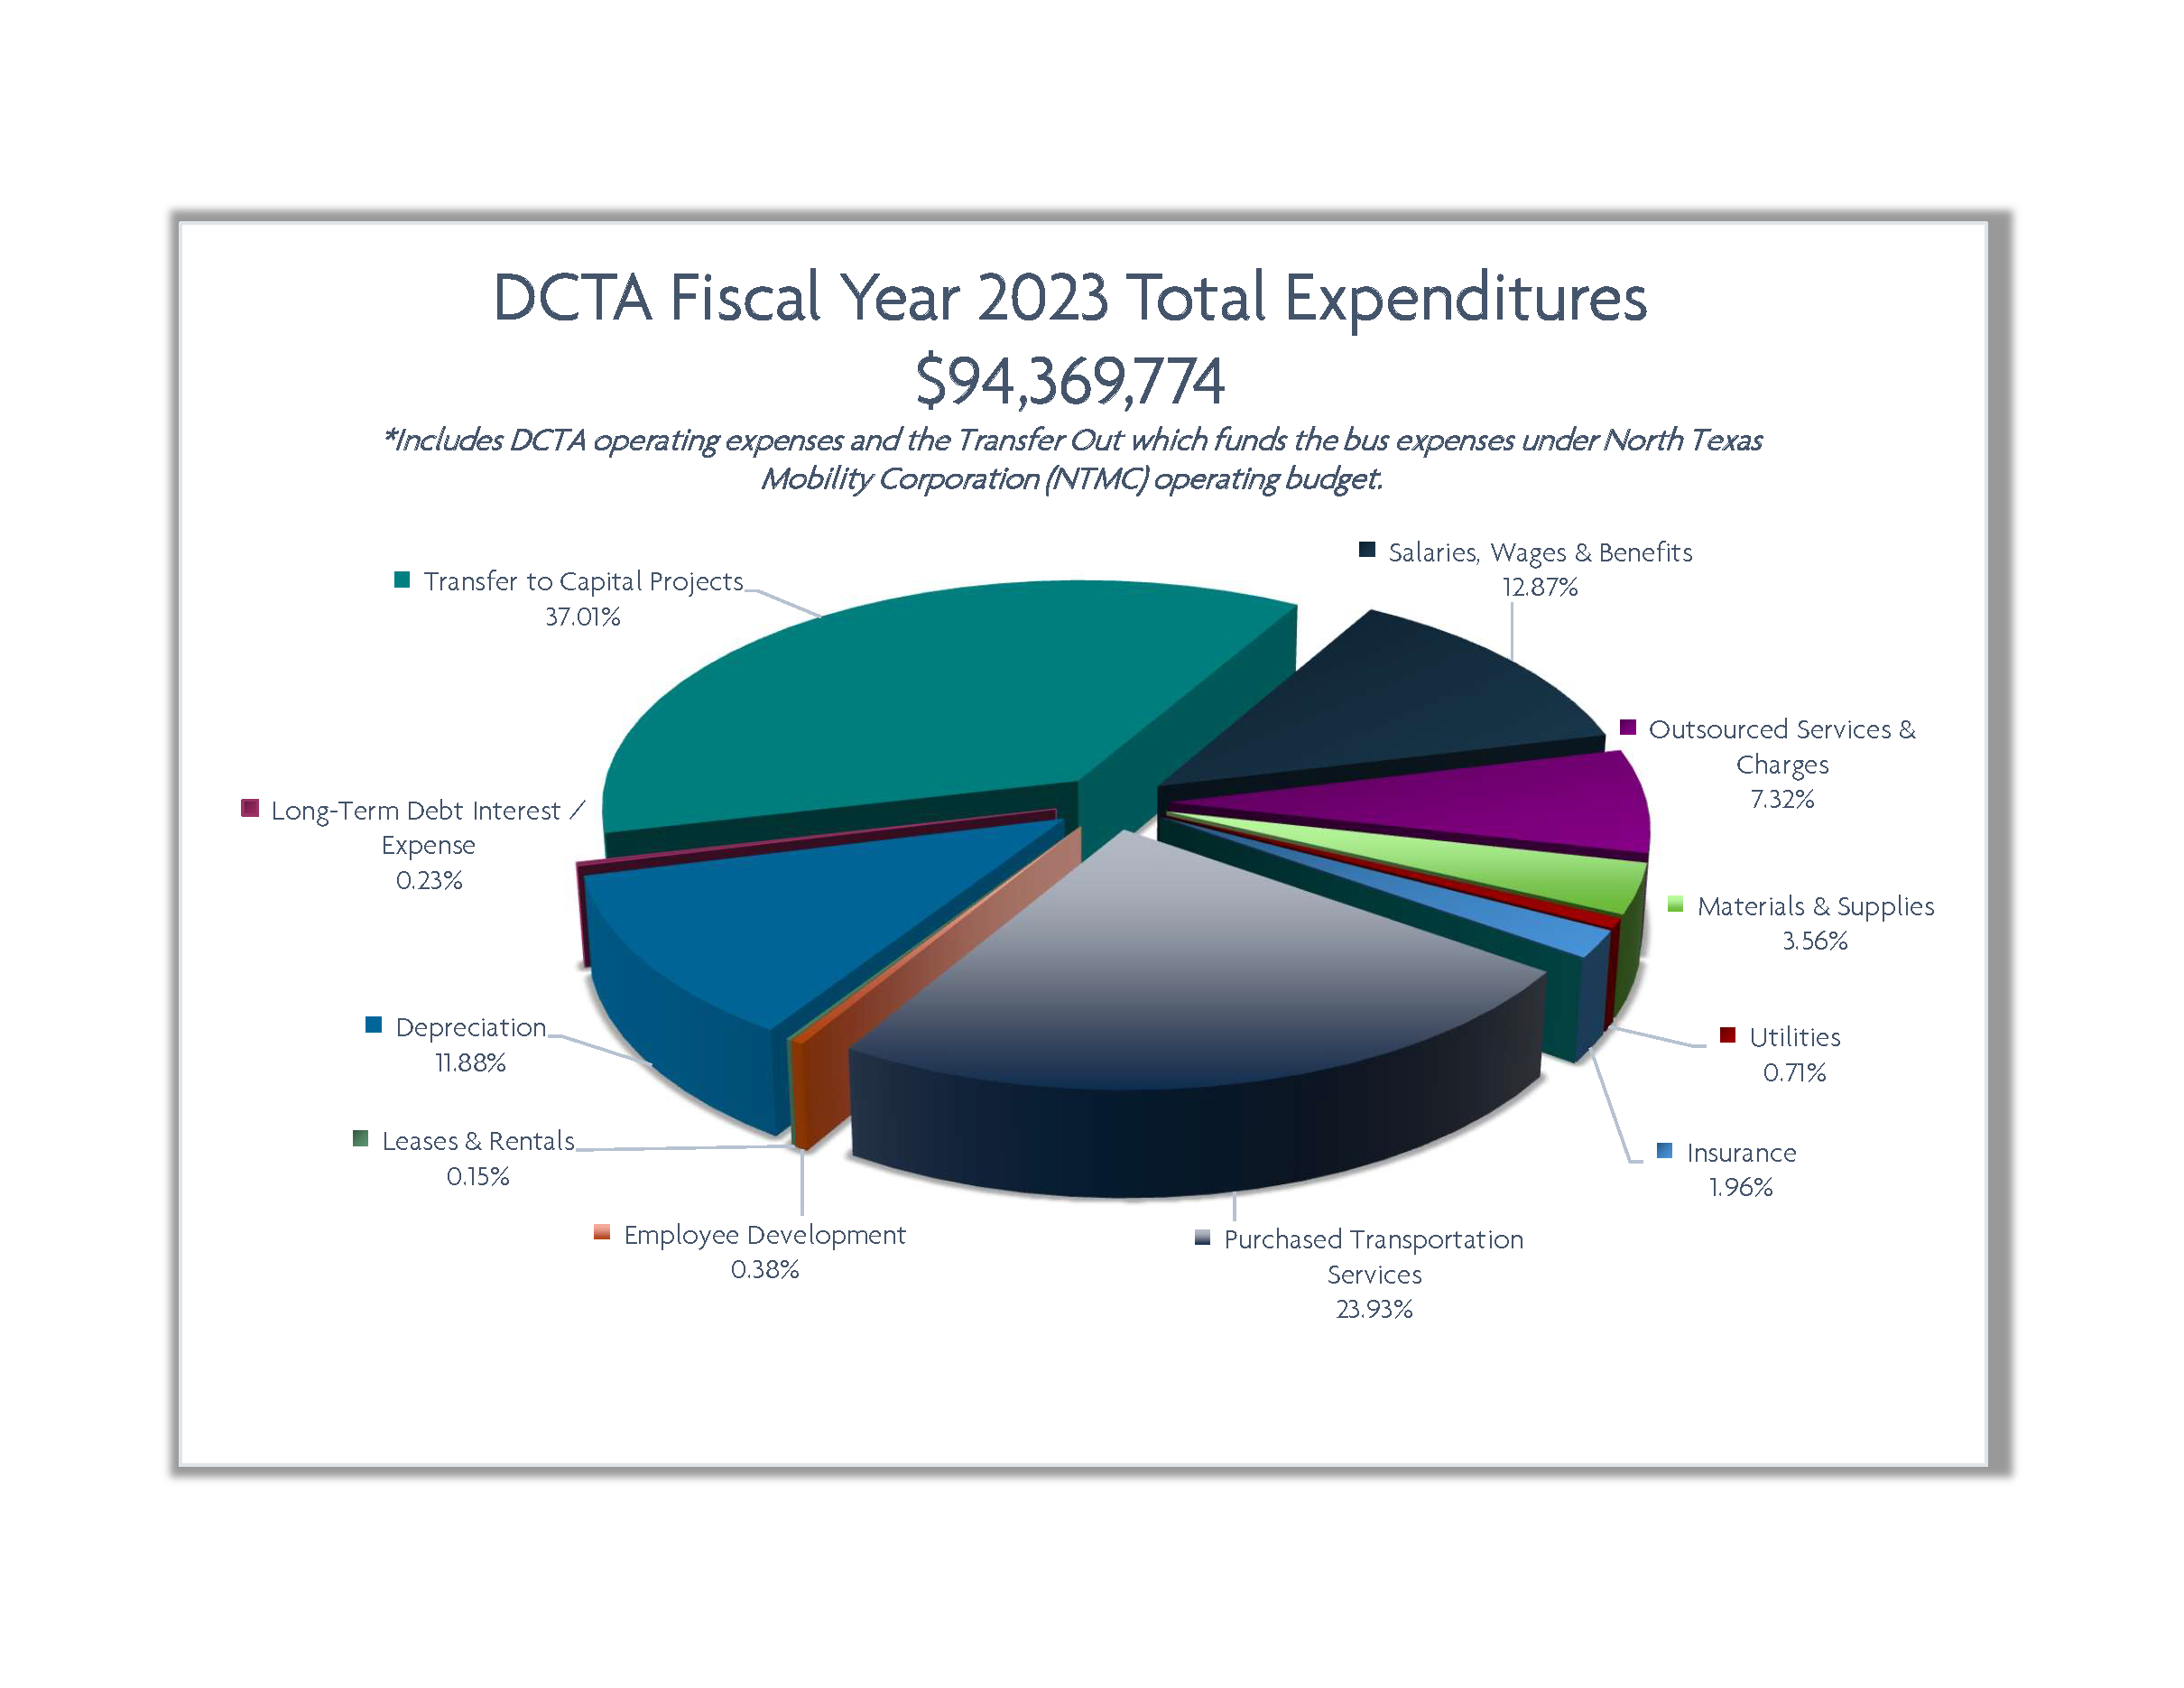 DCTA Fiscal Year 2023 Total Expenditures Pie Graph